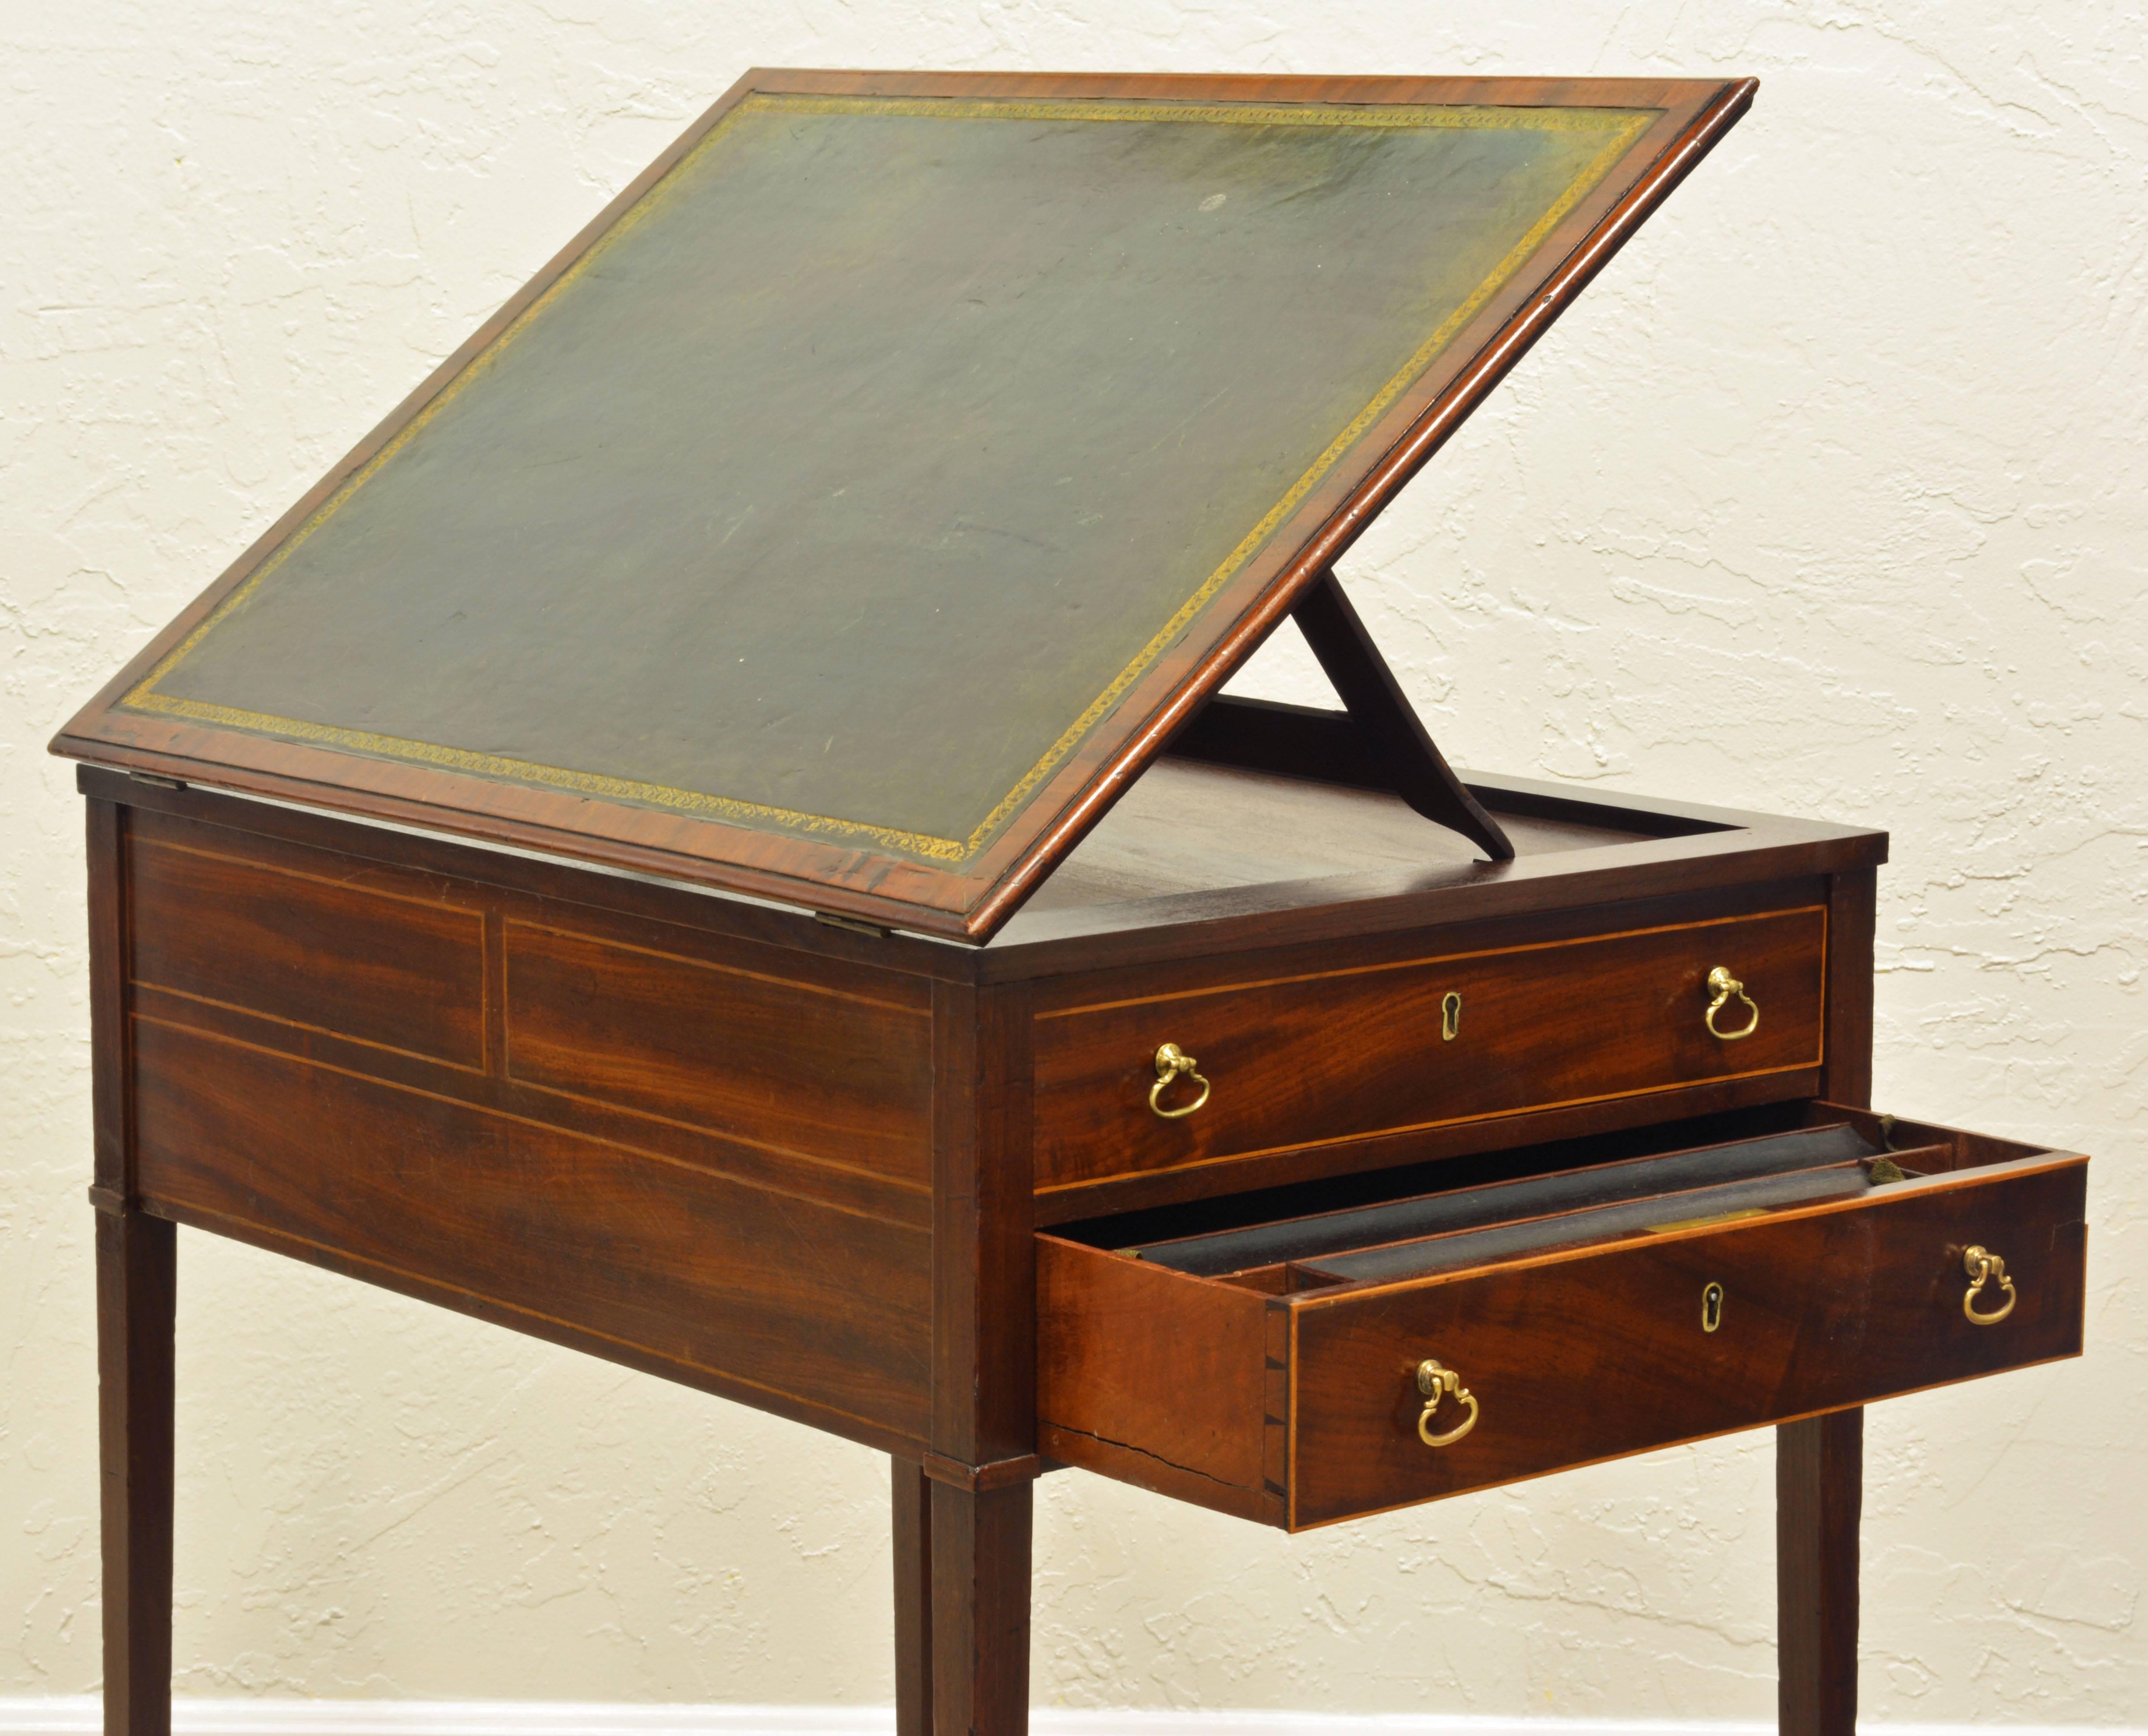 English Mid-19th Century Georgian Mahogany Work Table and Lectern by Gillows Lancaster